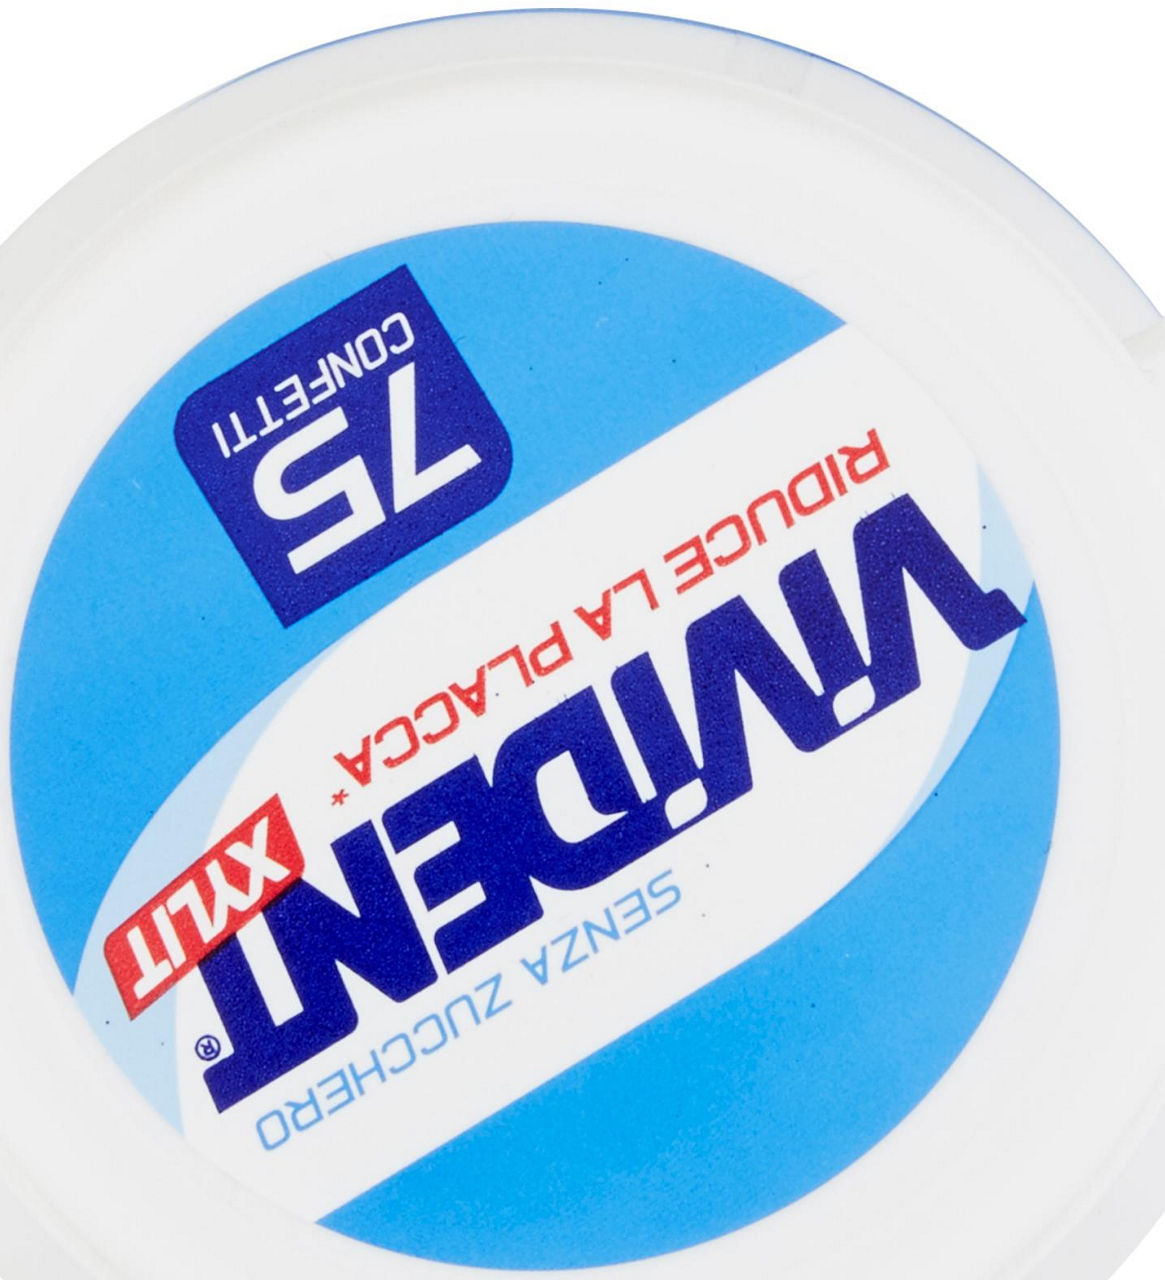 CHEWING-GUM VIVIDENT XYLIT PERFETTI BARATTOLO GR. 104 - 4